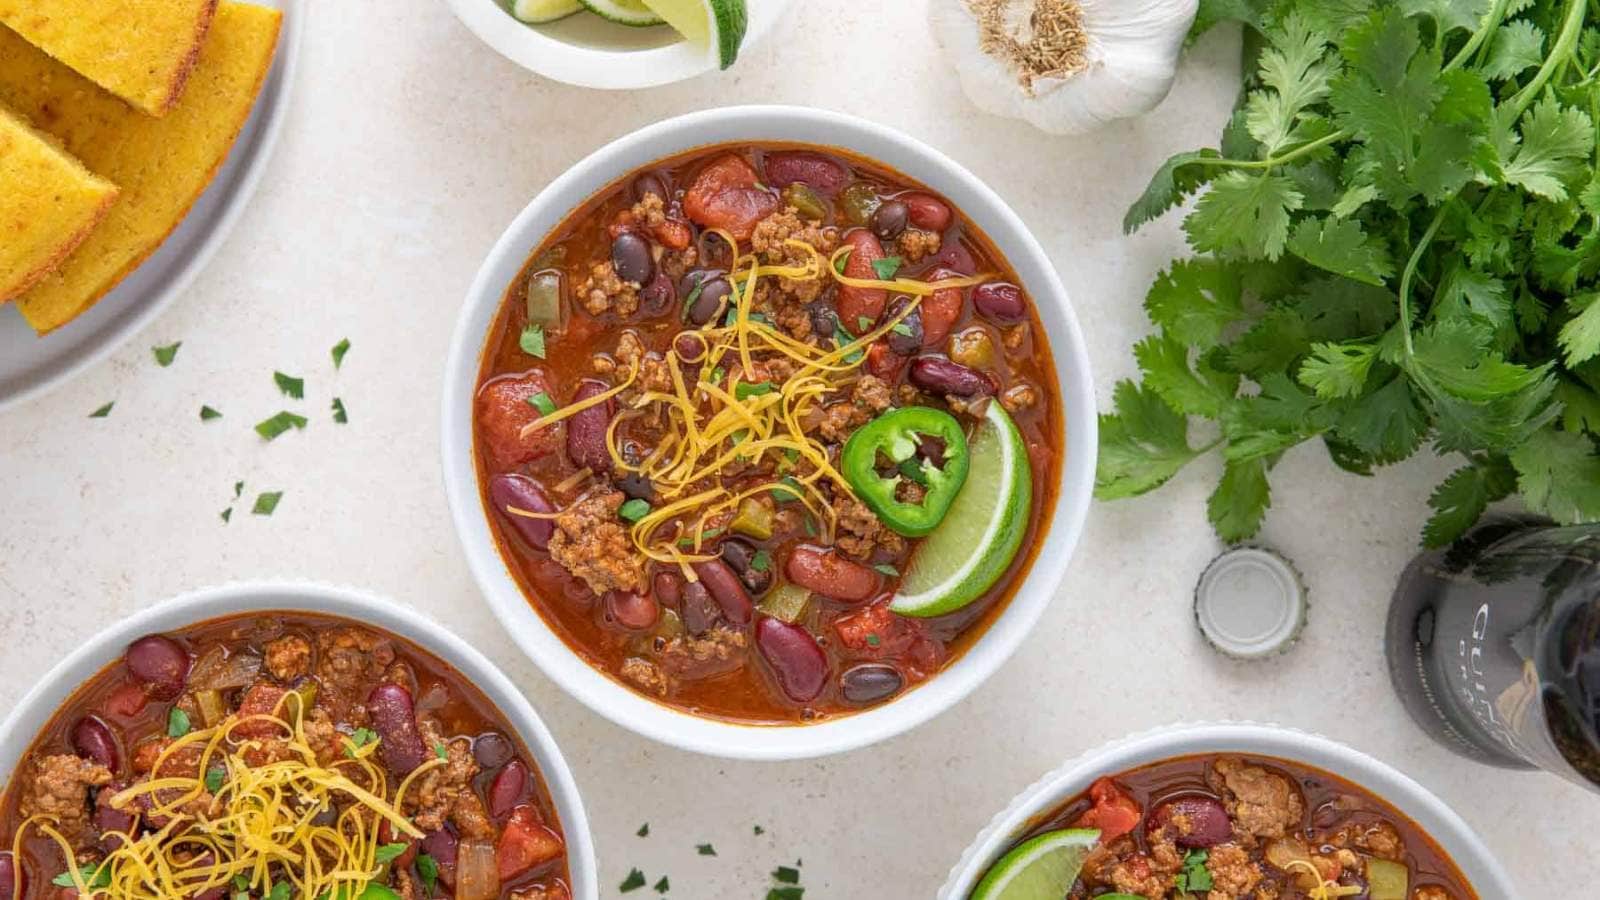 Beer Chili recipe by The Blond Cook.